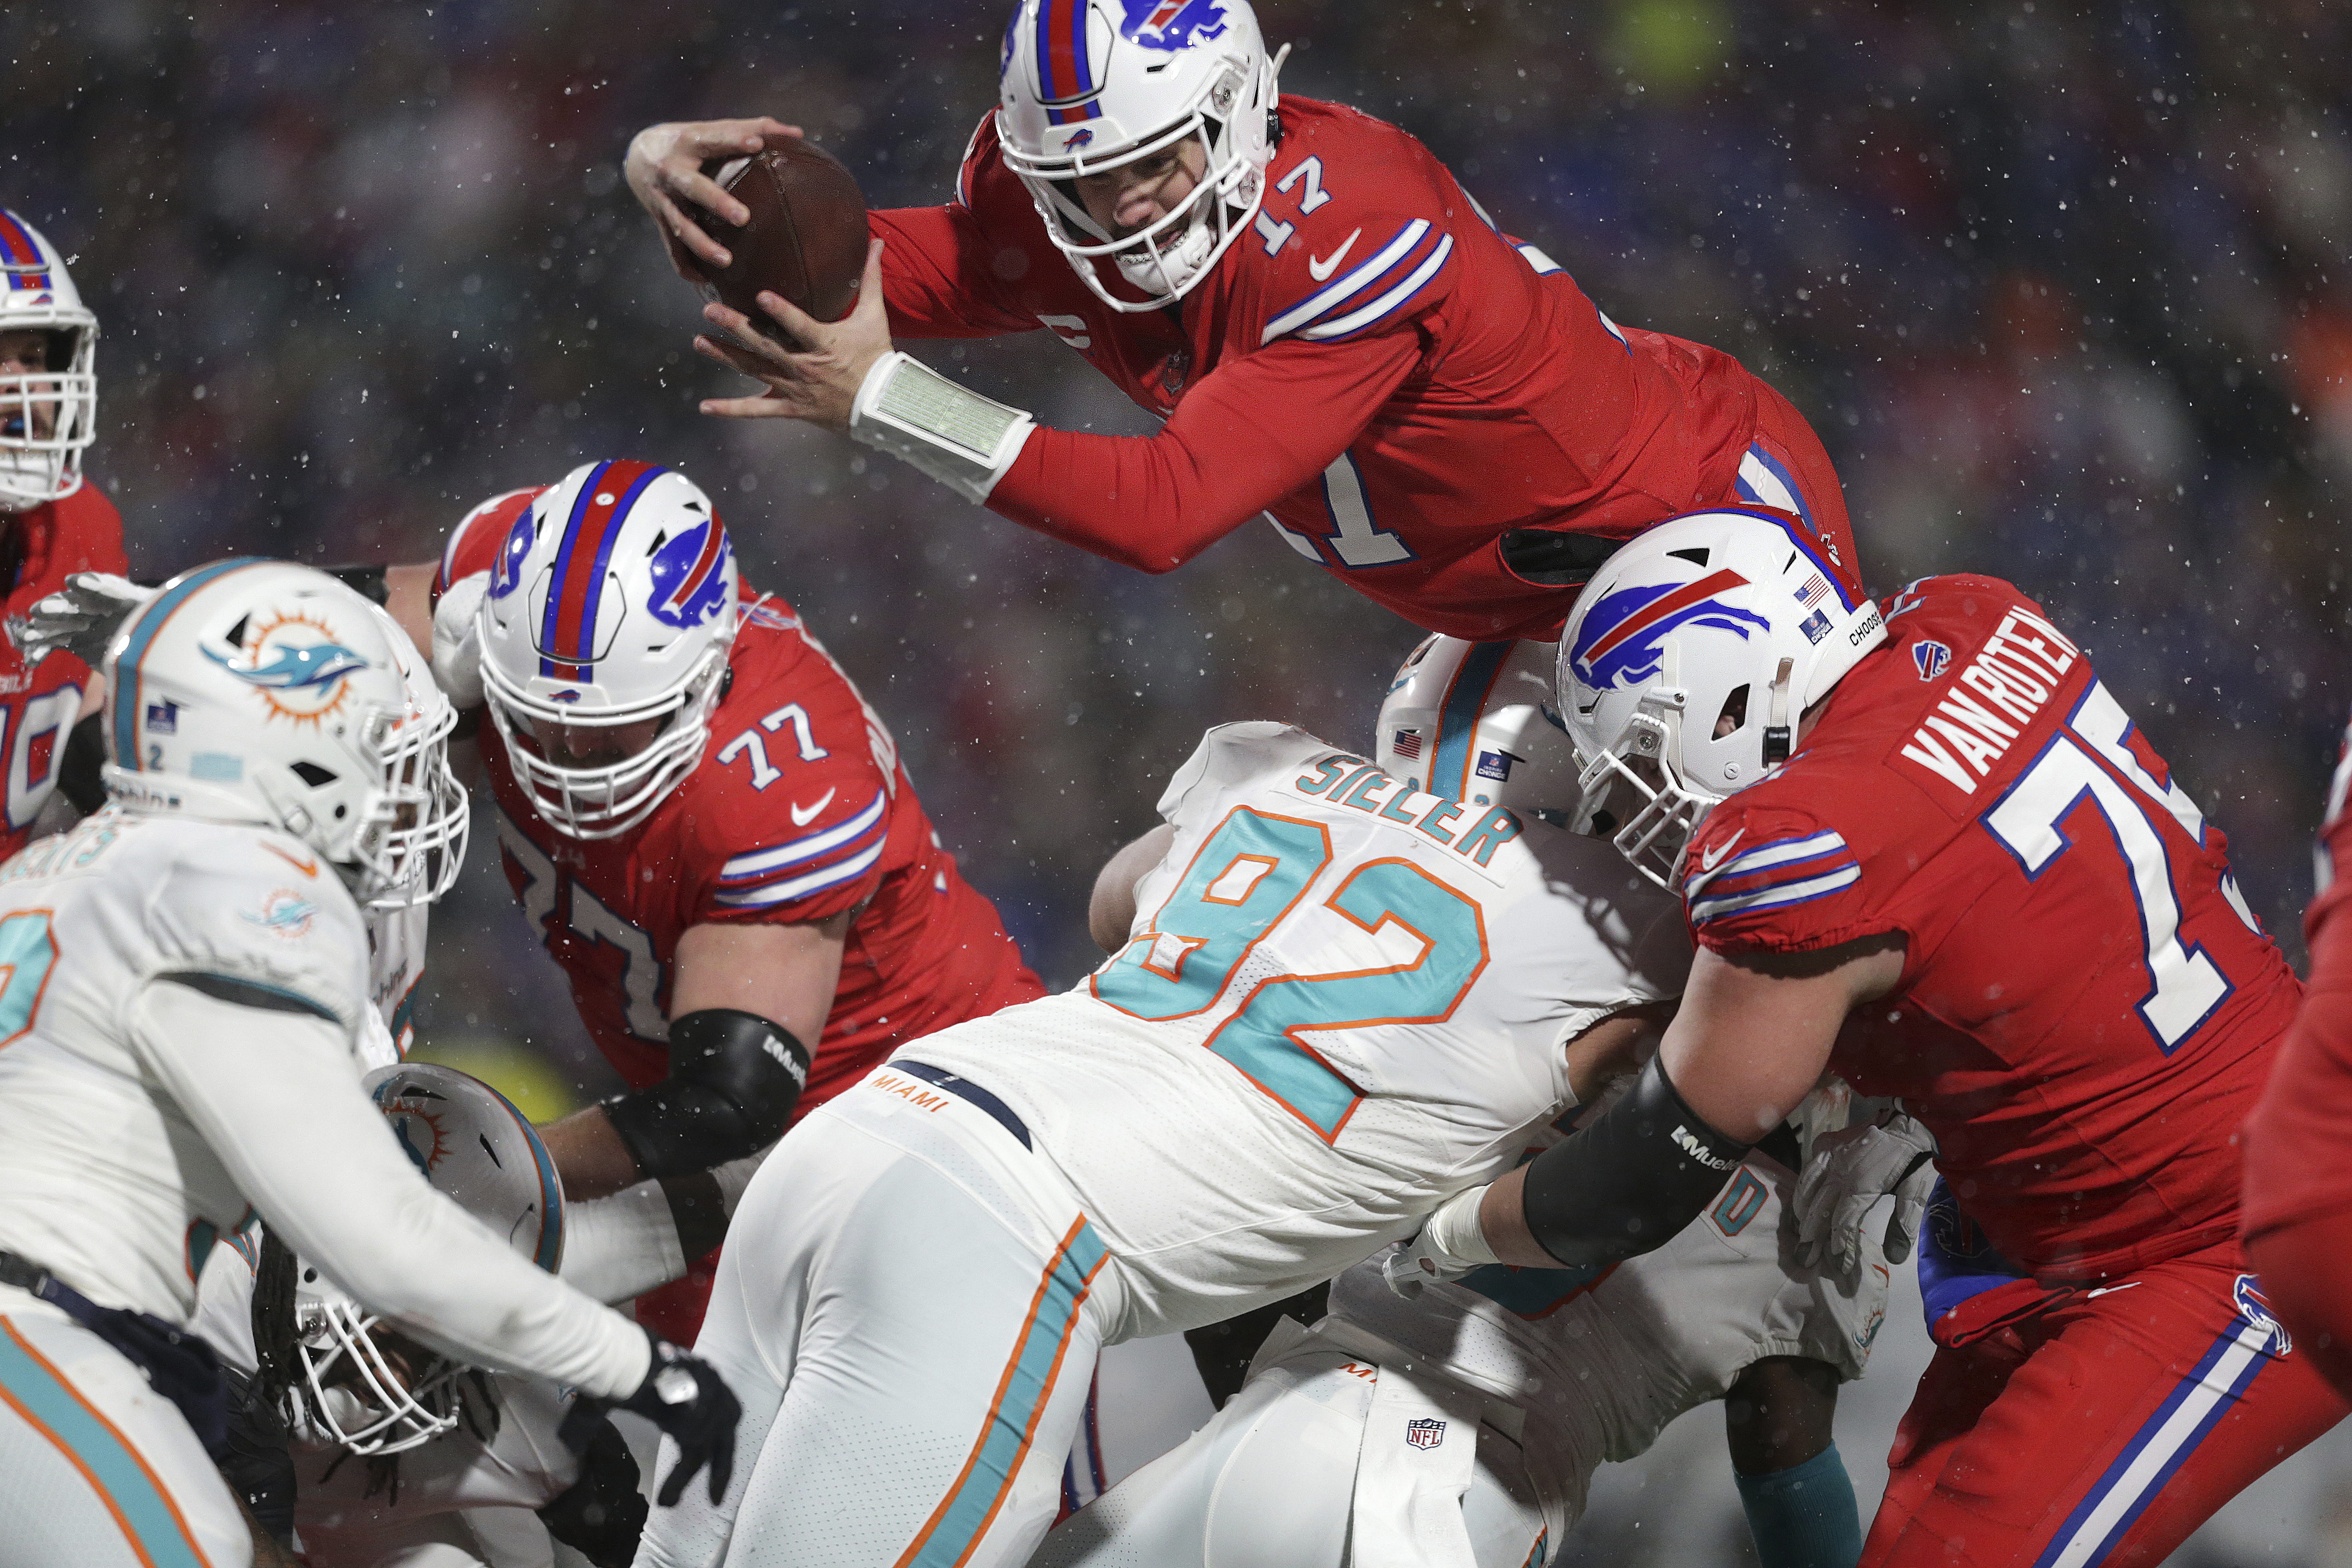 NFL best bets for Wild Card Weekend: Bills should roll over